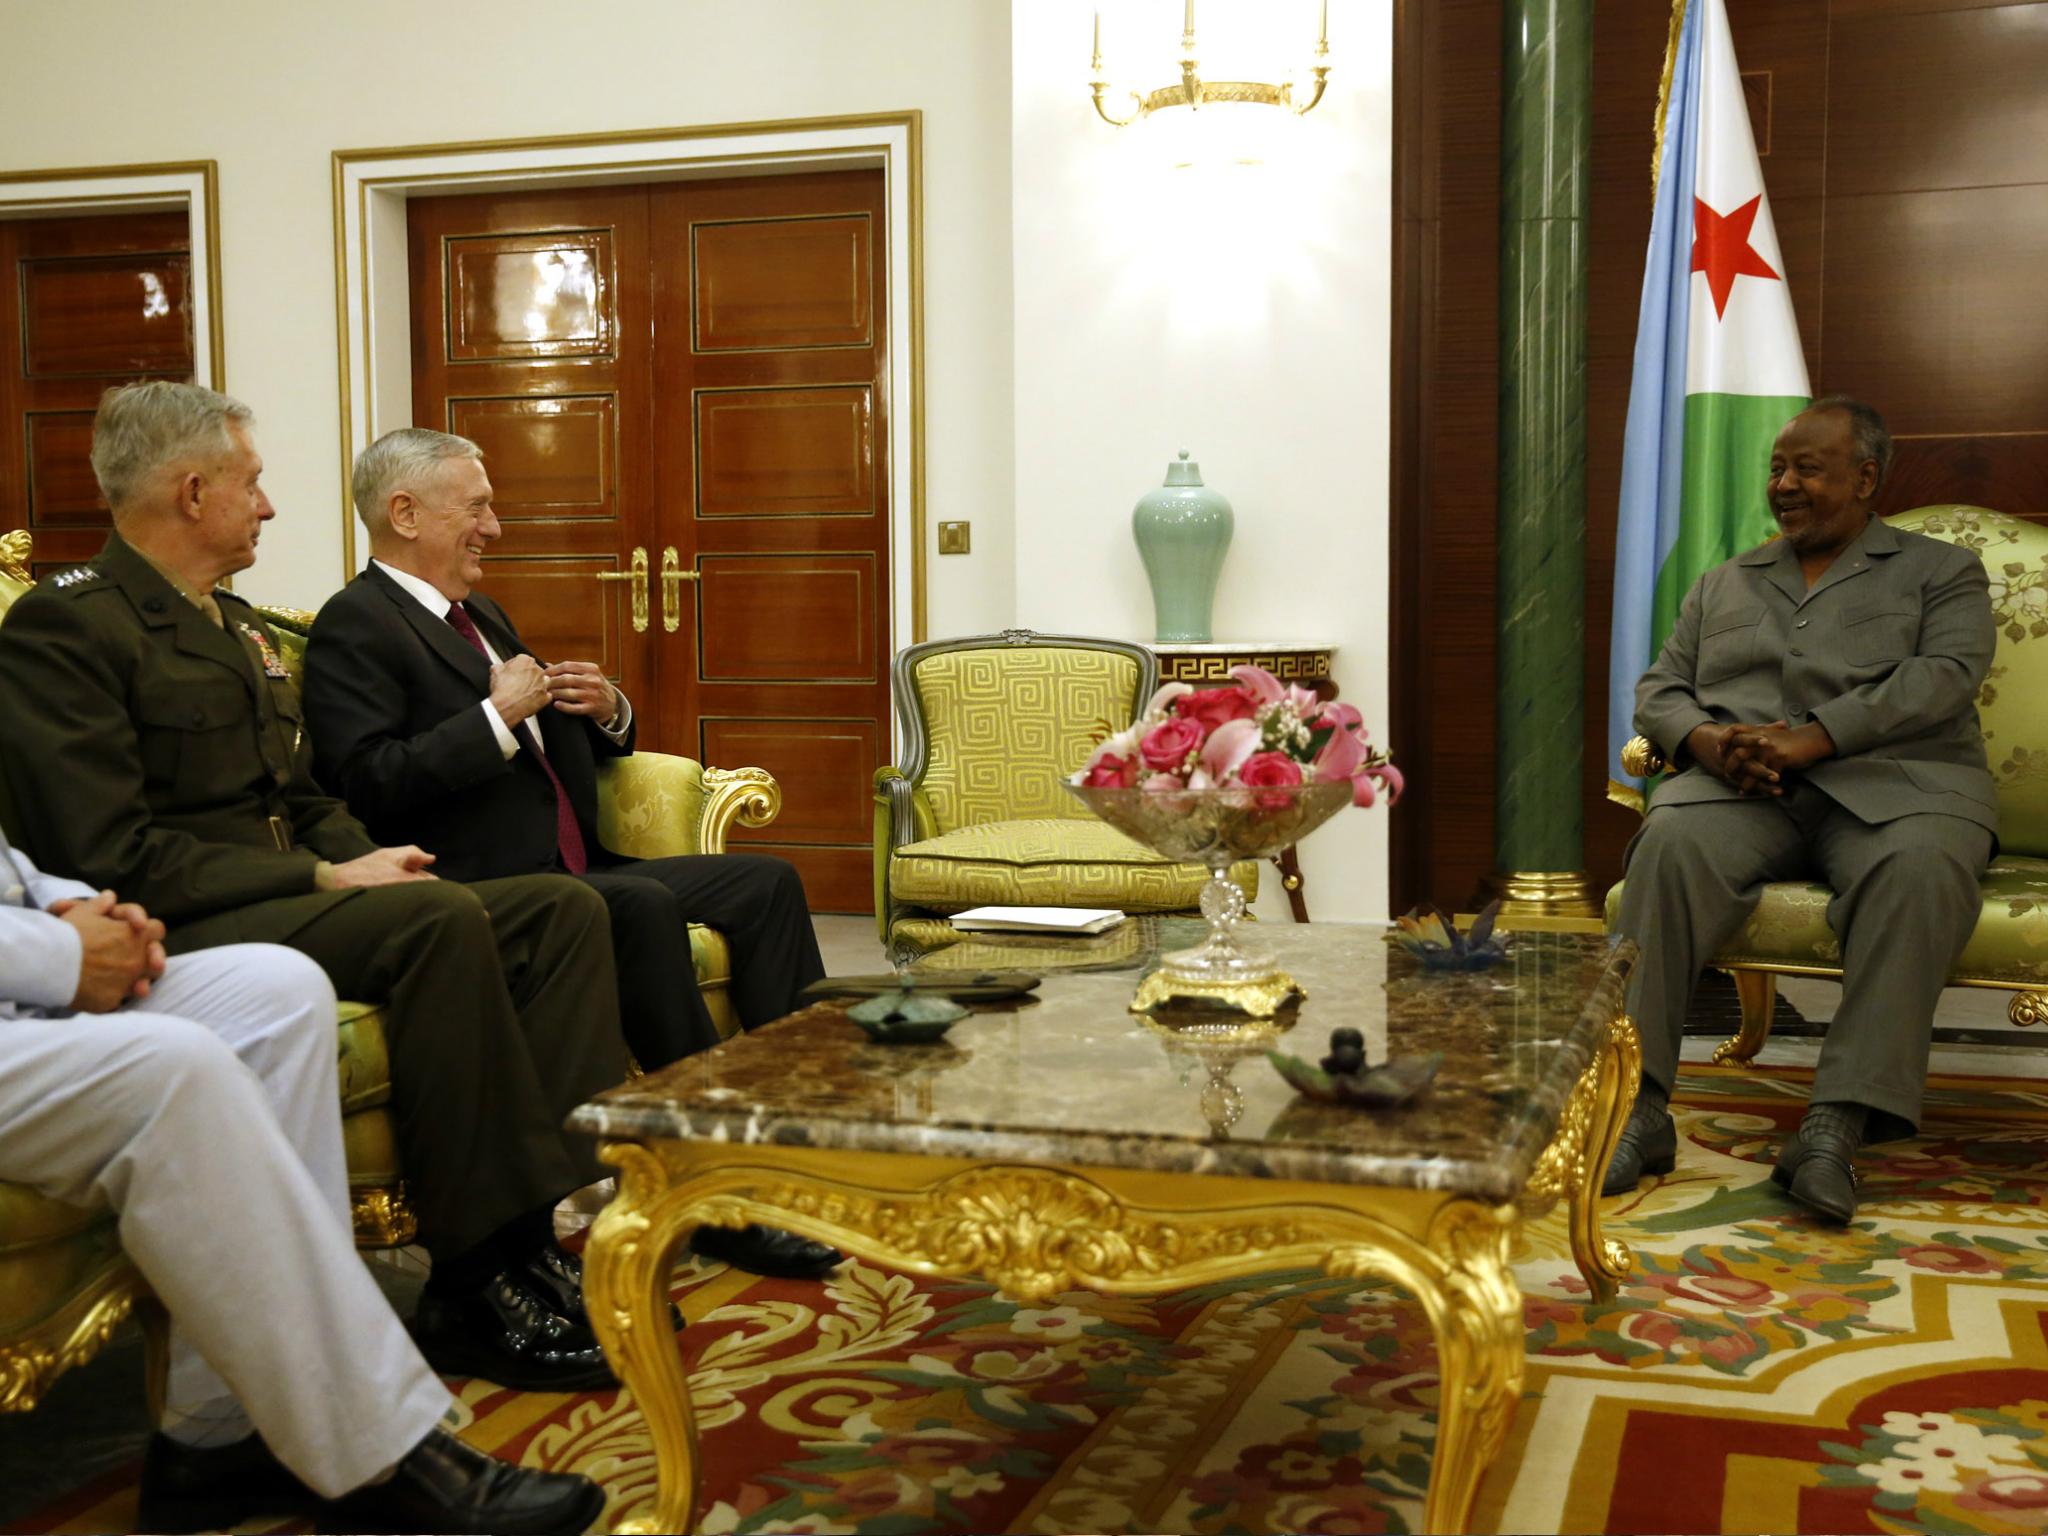 Djibouti's President Ismail Omar Guelleh welcomed US Defence Secretary James Mattis and U.S. Marine Corps General Thomas Waldhauser at the Presidential Palace on 23 April 2017 in Djibouti.